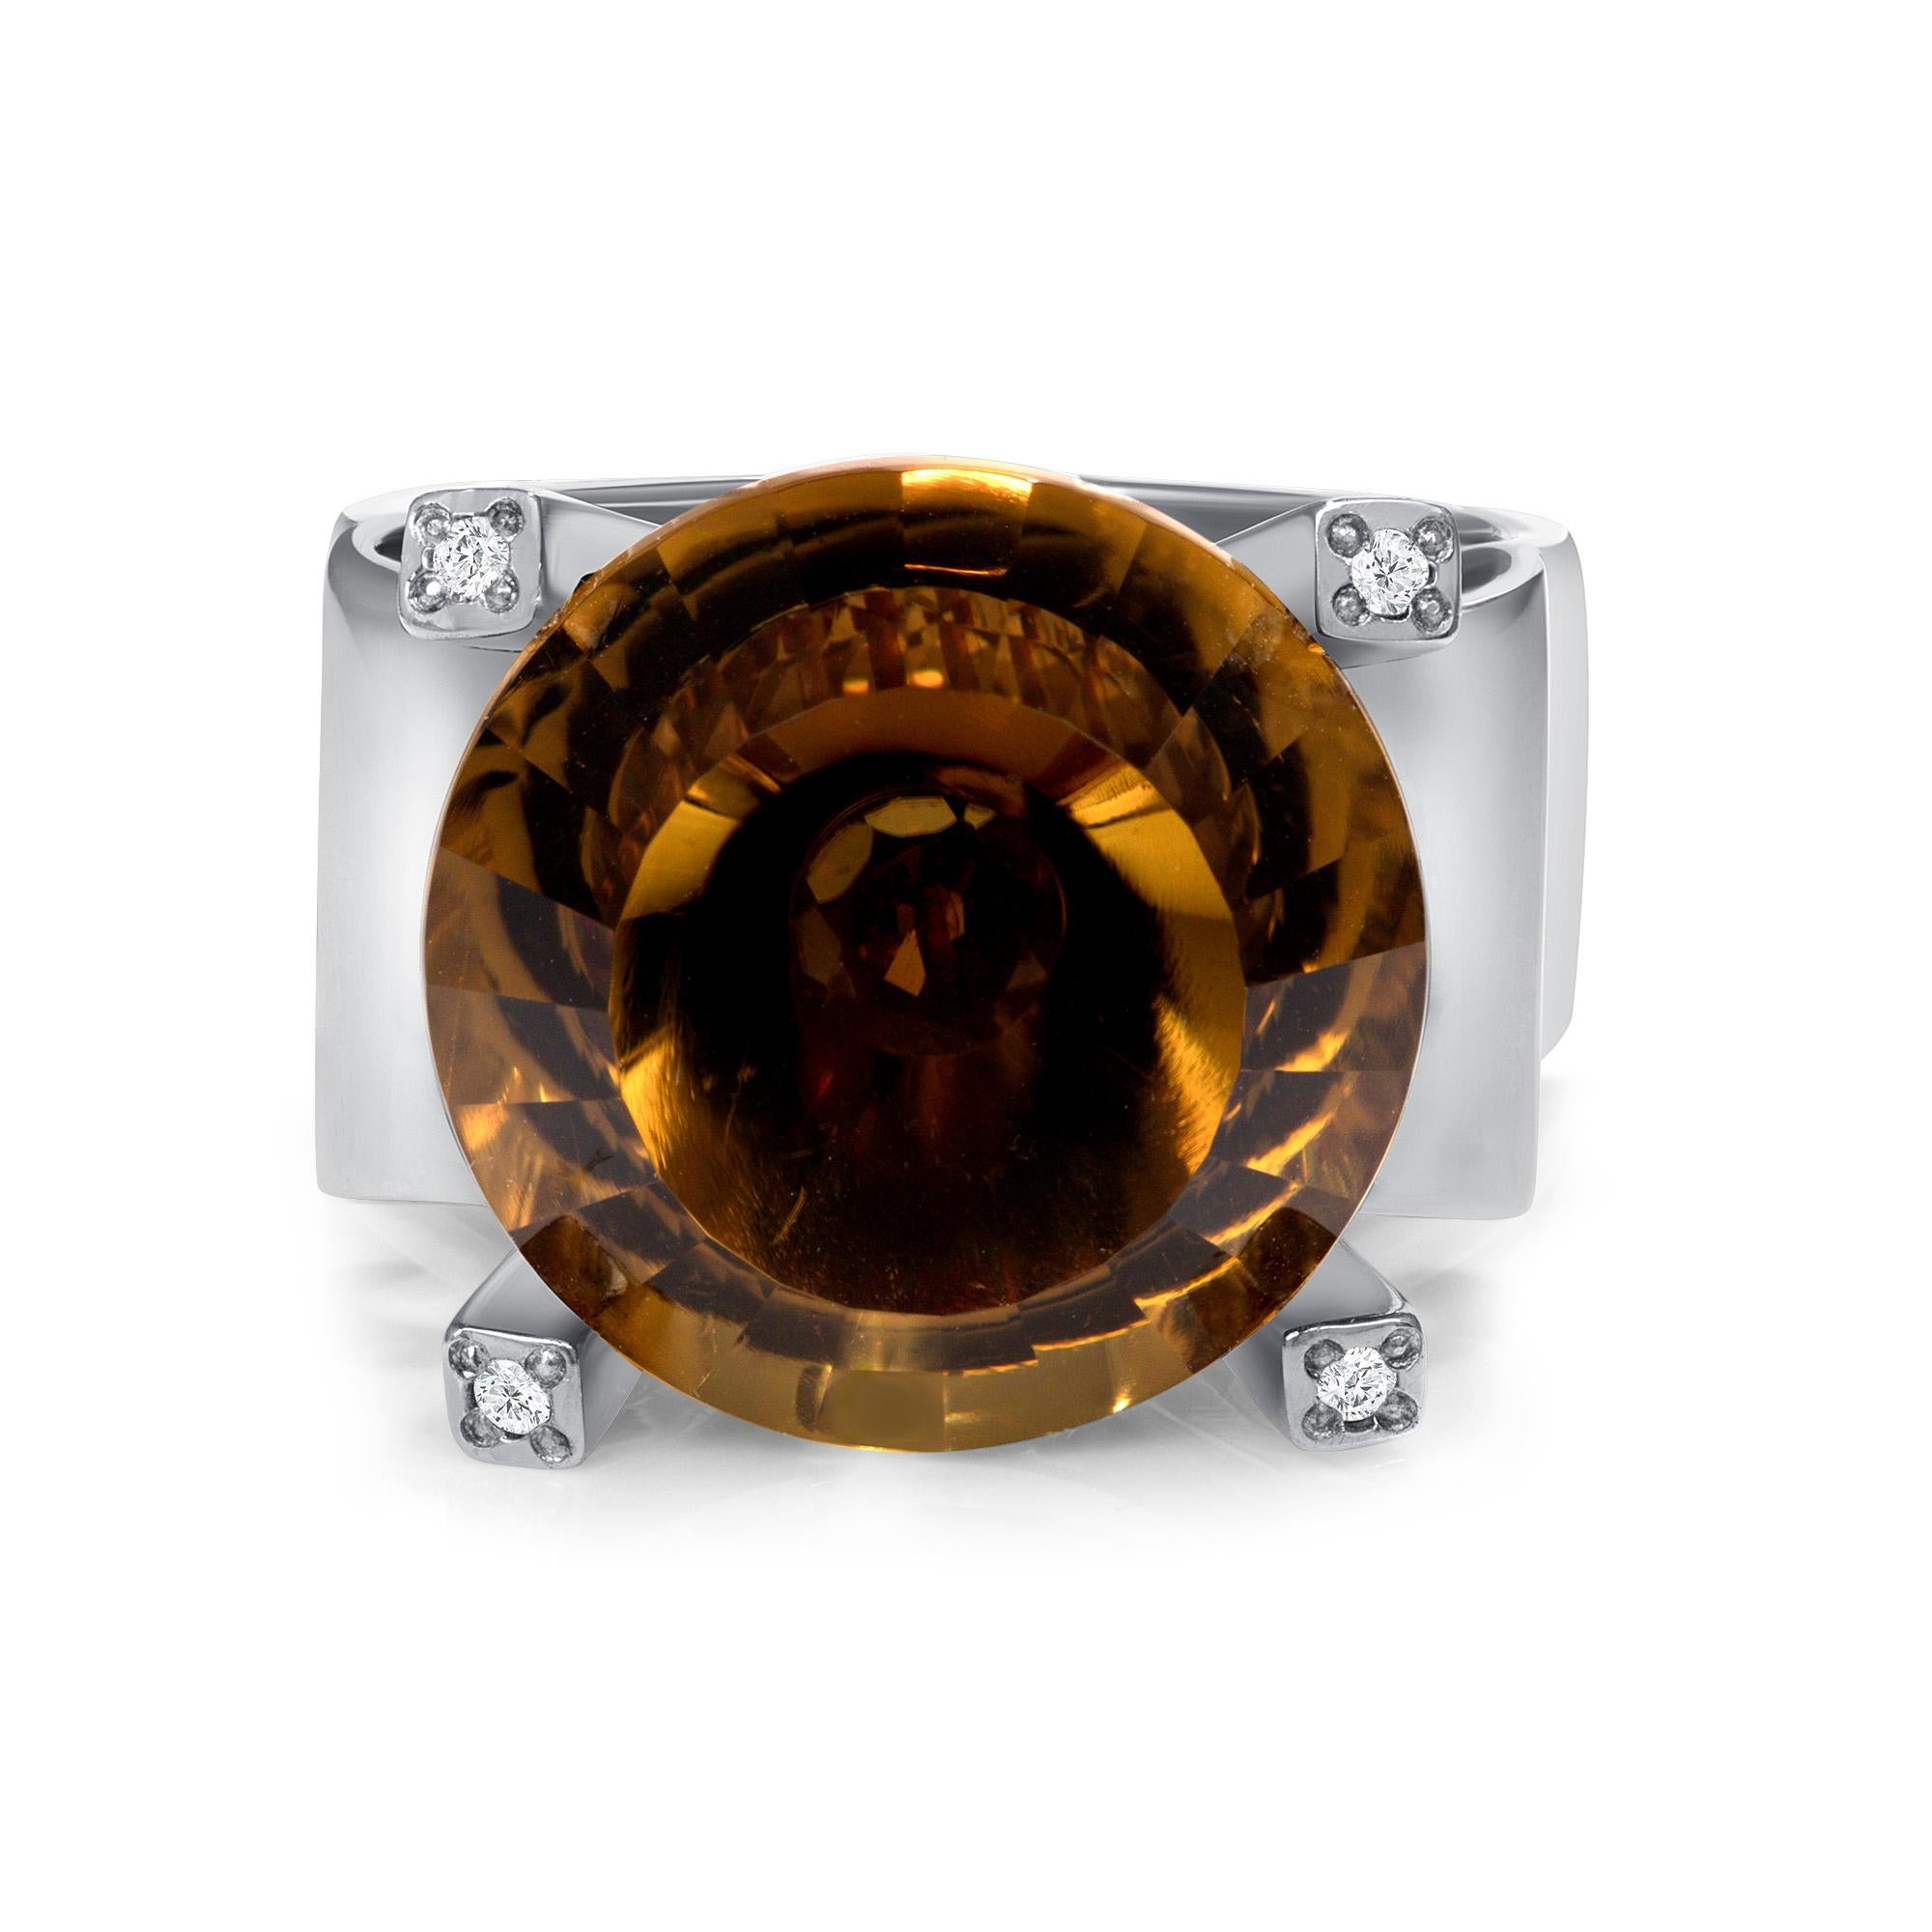 13.04 Carat Citrine Garnet Diamond Sterling Silver Solitaire Ring In New Condition For Sale In Woodstock, GA